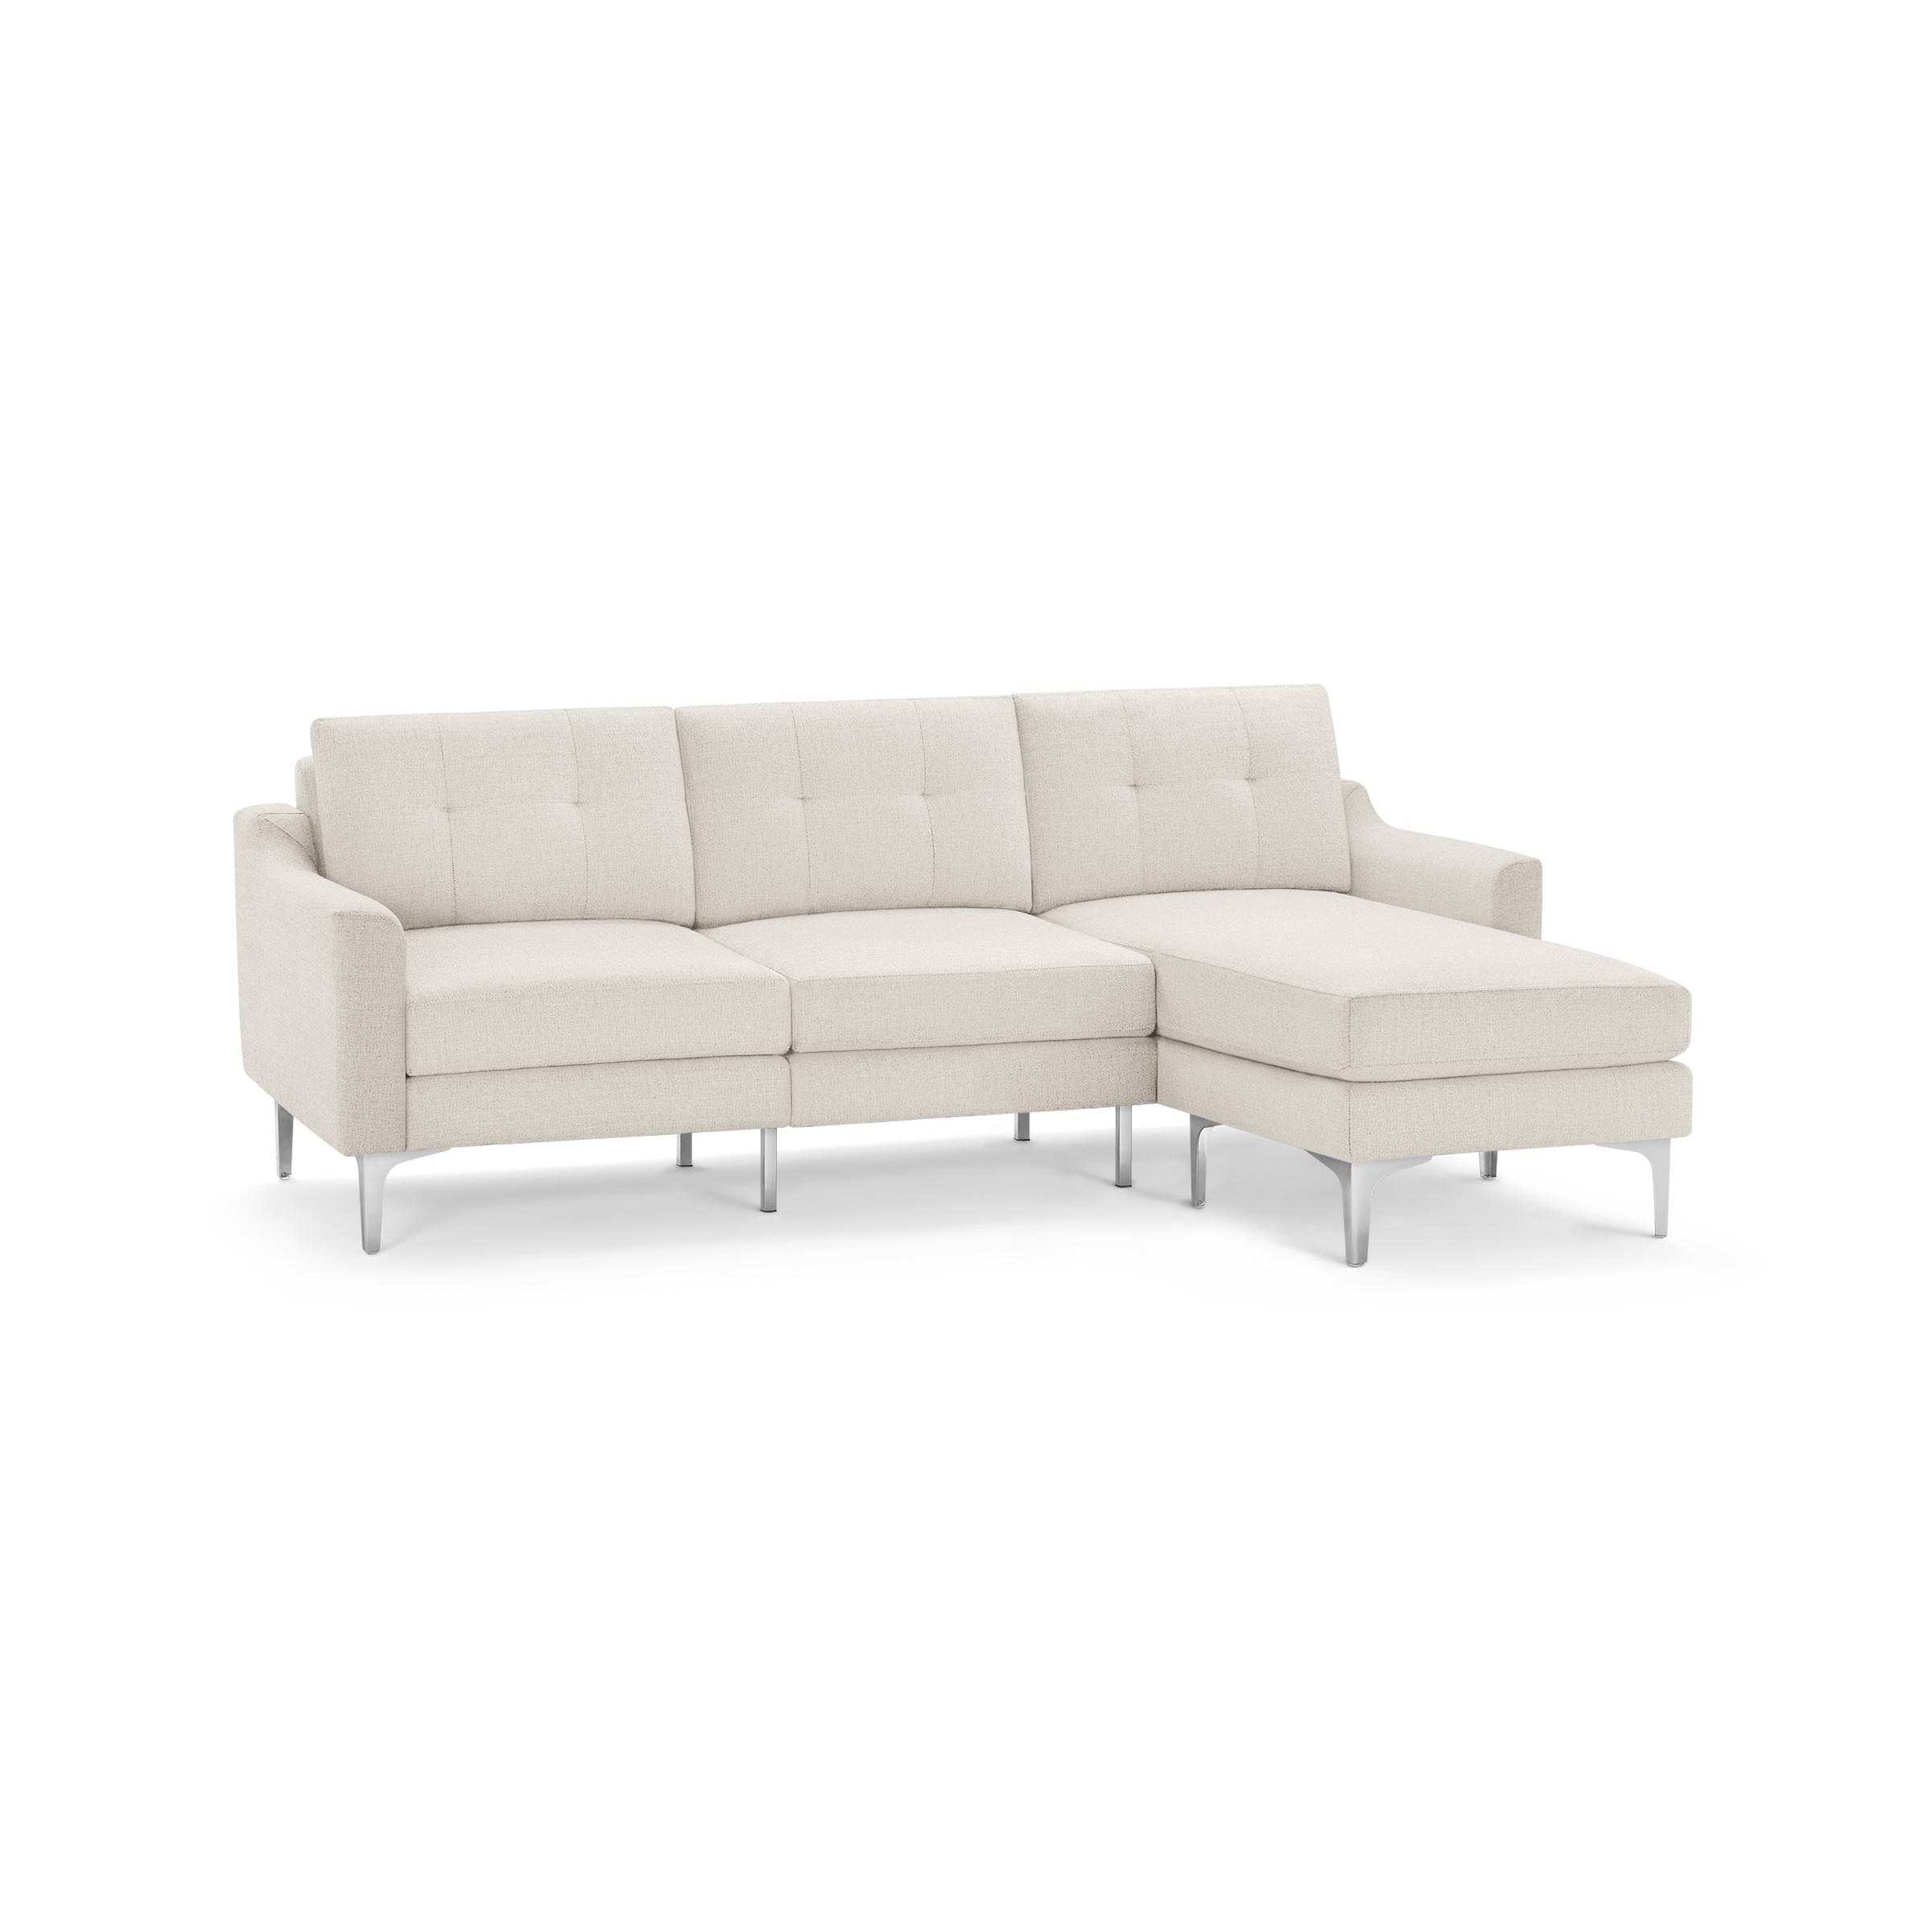 The Slope Nomad Sectional Sofa in Ivory - Image 1